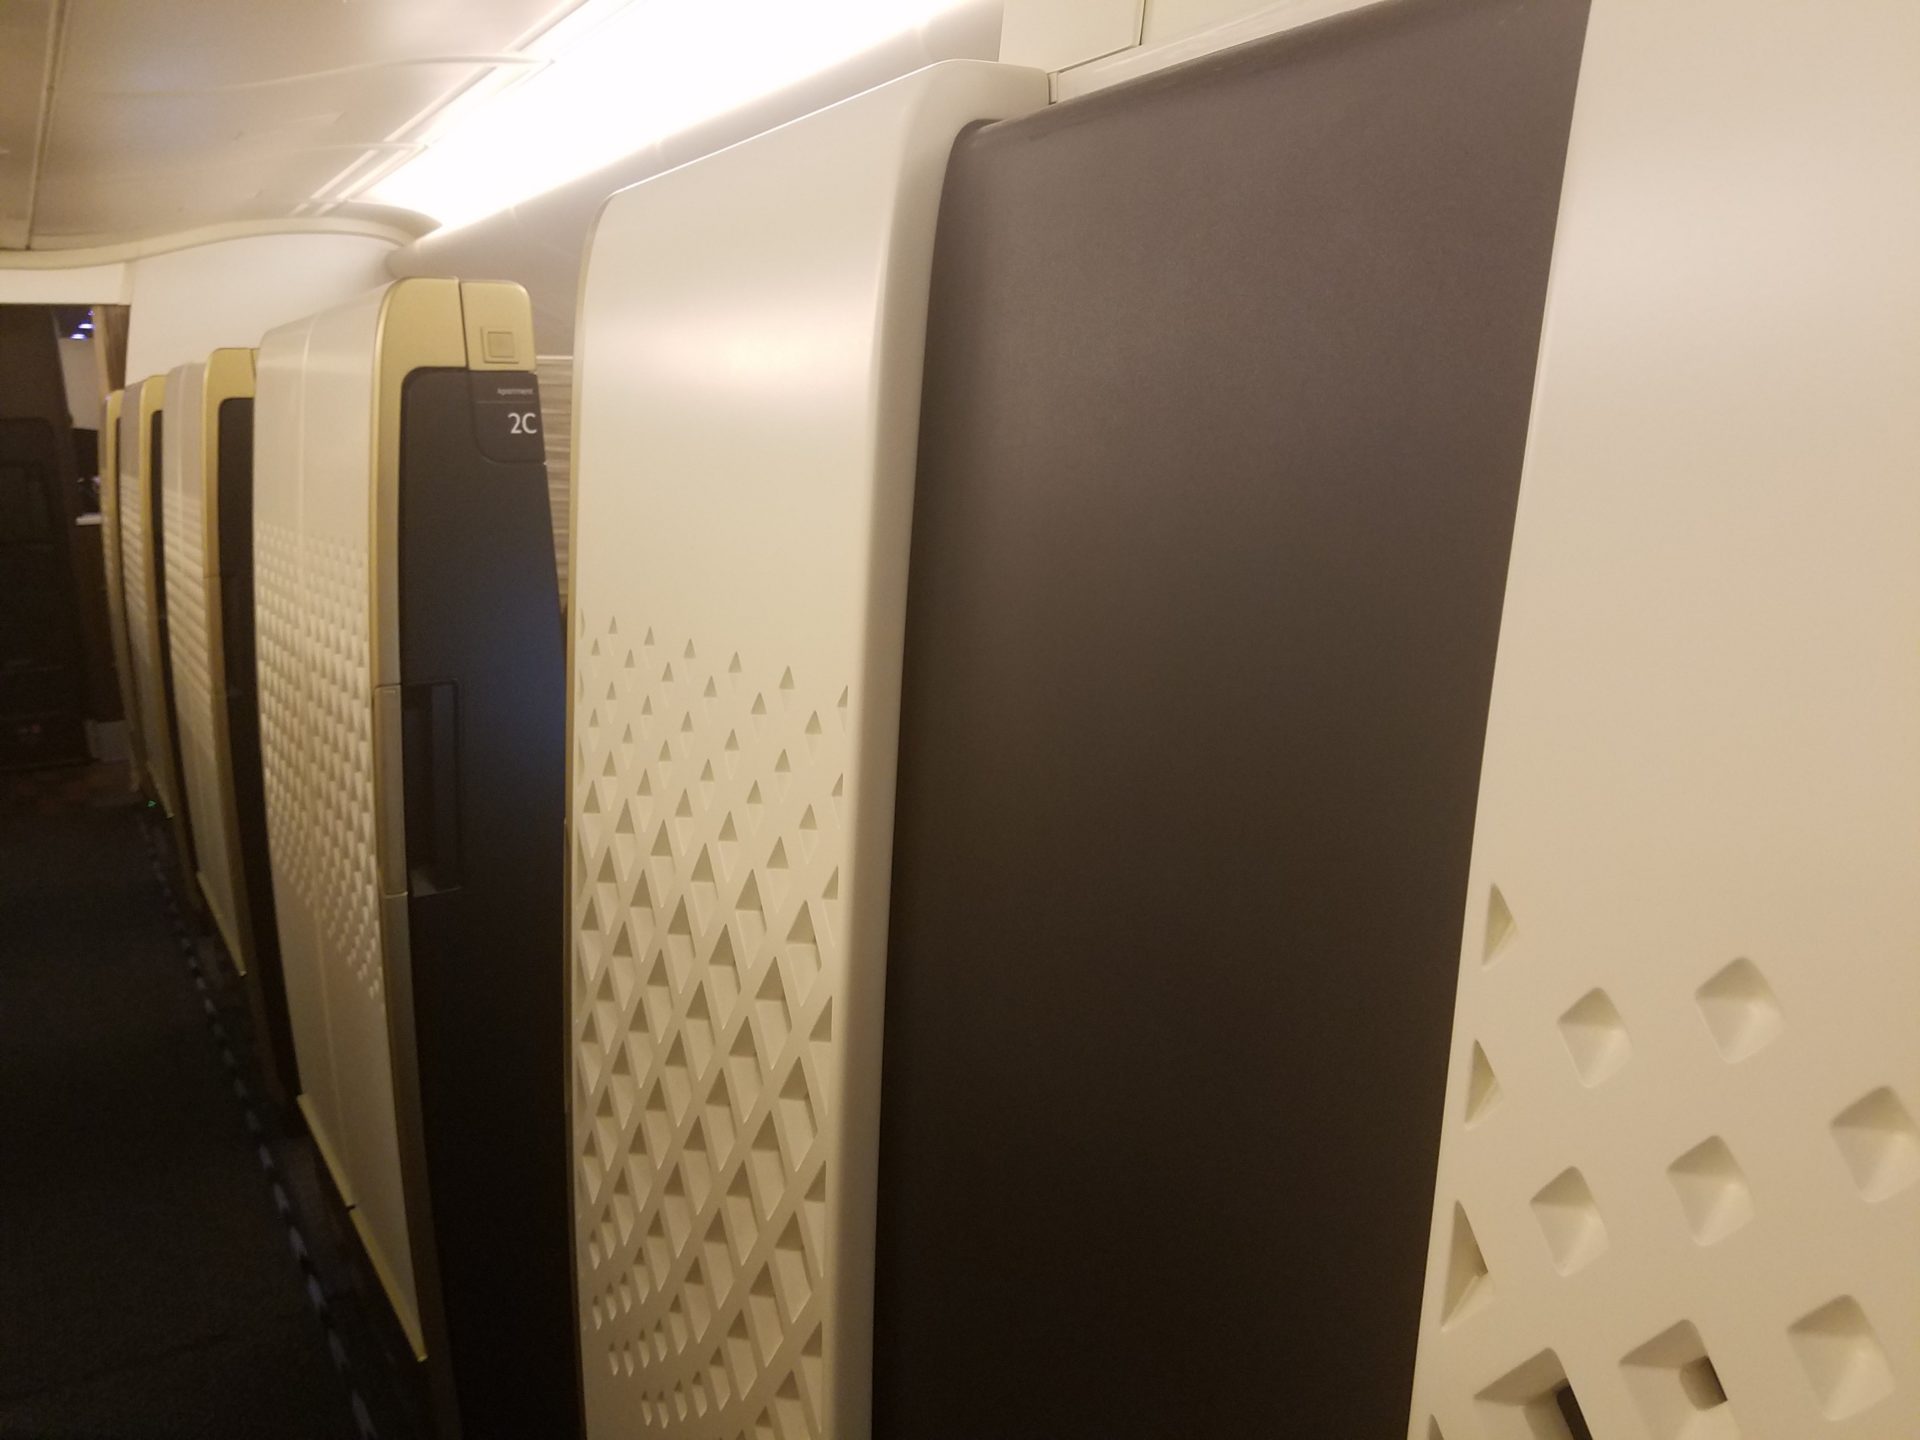 a row of white and black refrigerators